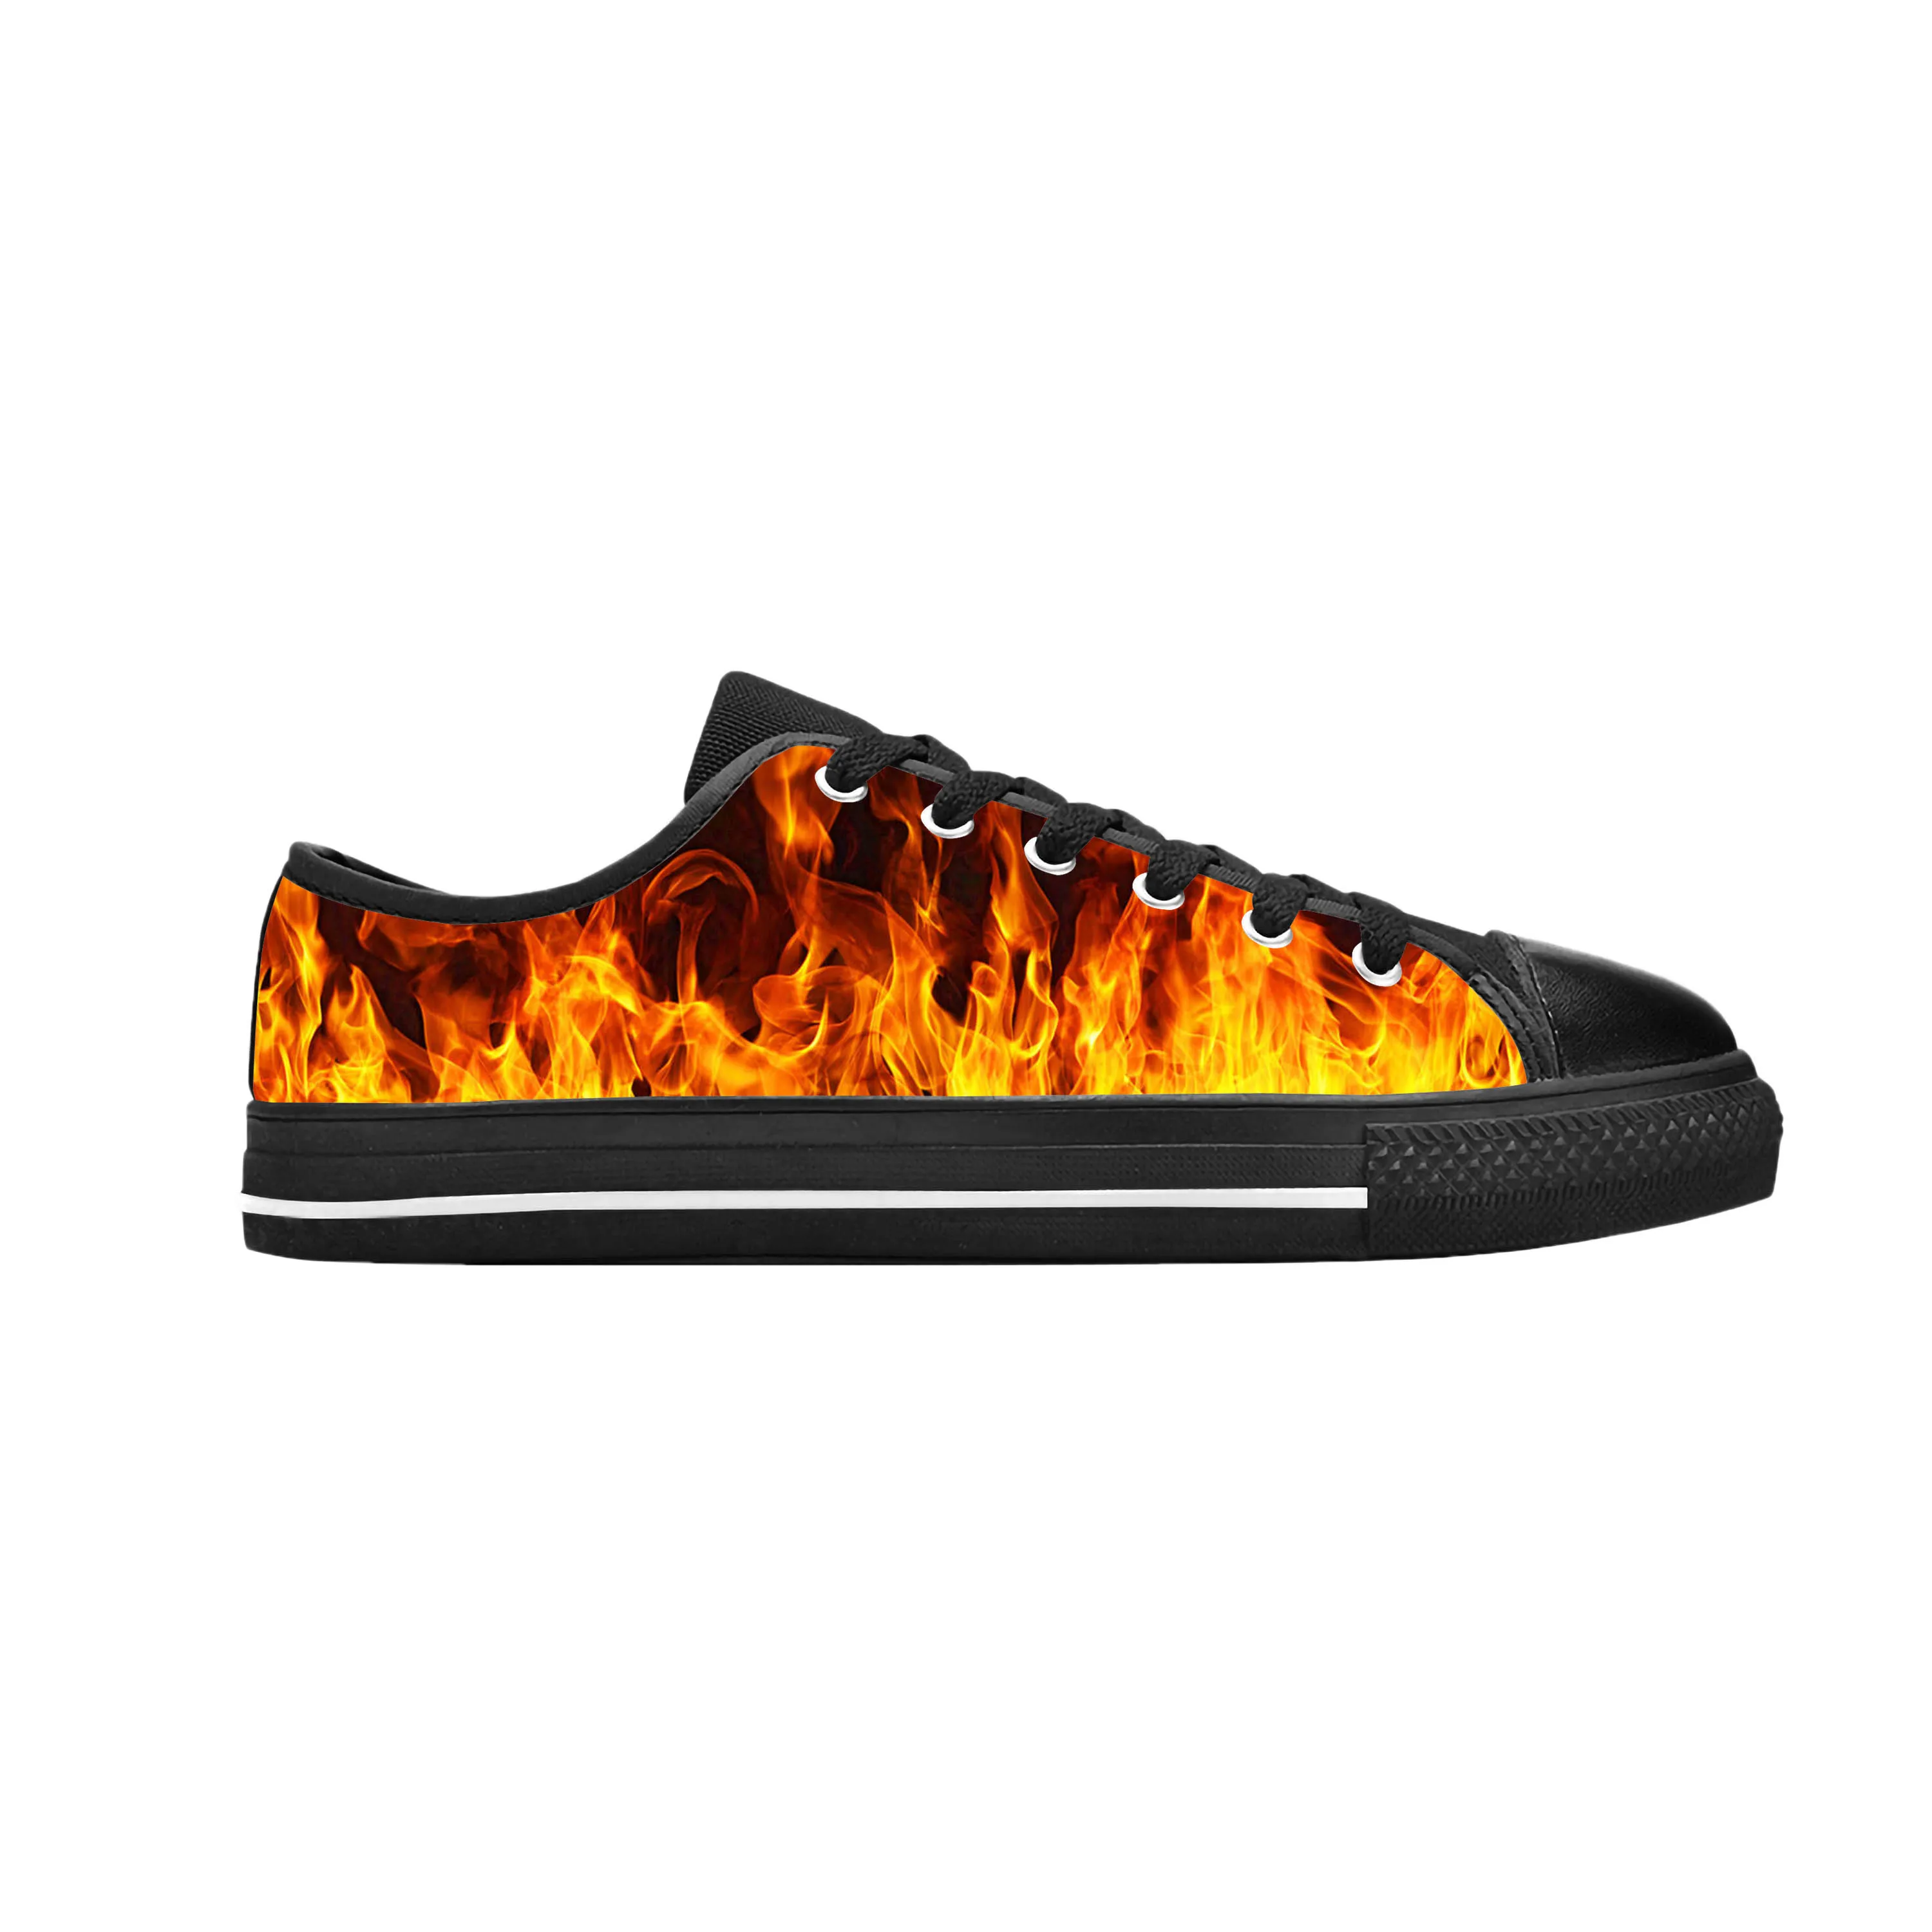 Fire Flame Flaming Pattern Anime Cartoon Fashion Casual Cloth Shoes Low Top Comfortable Breathable 3D Print Men Women Sneakers